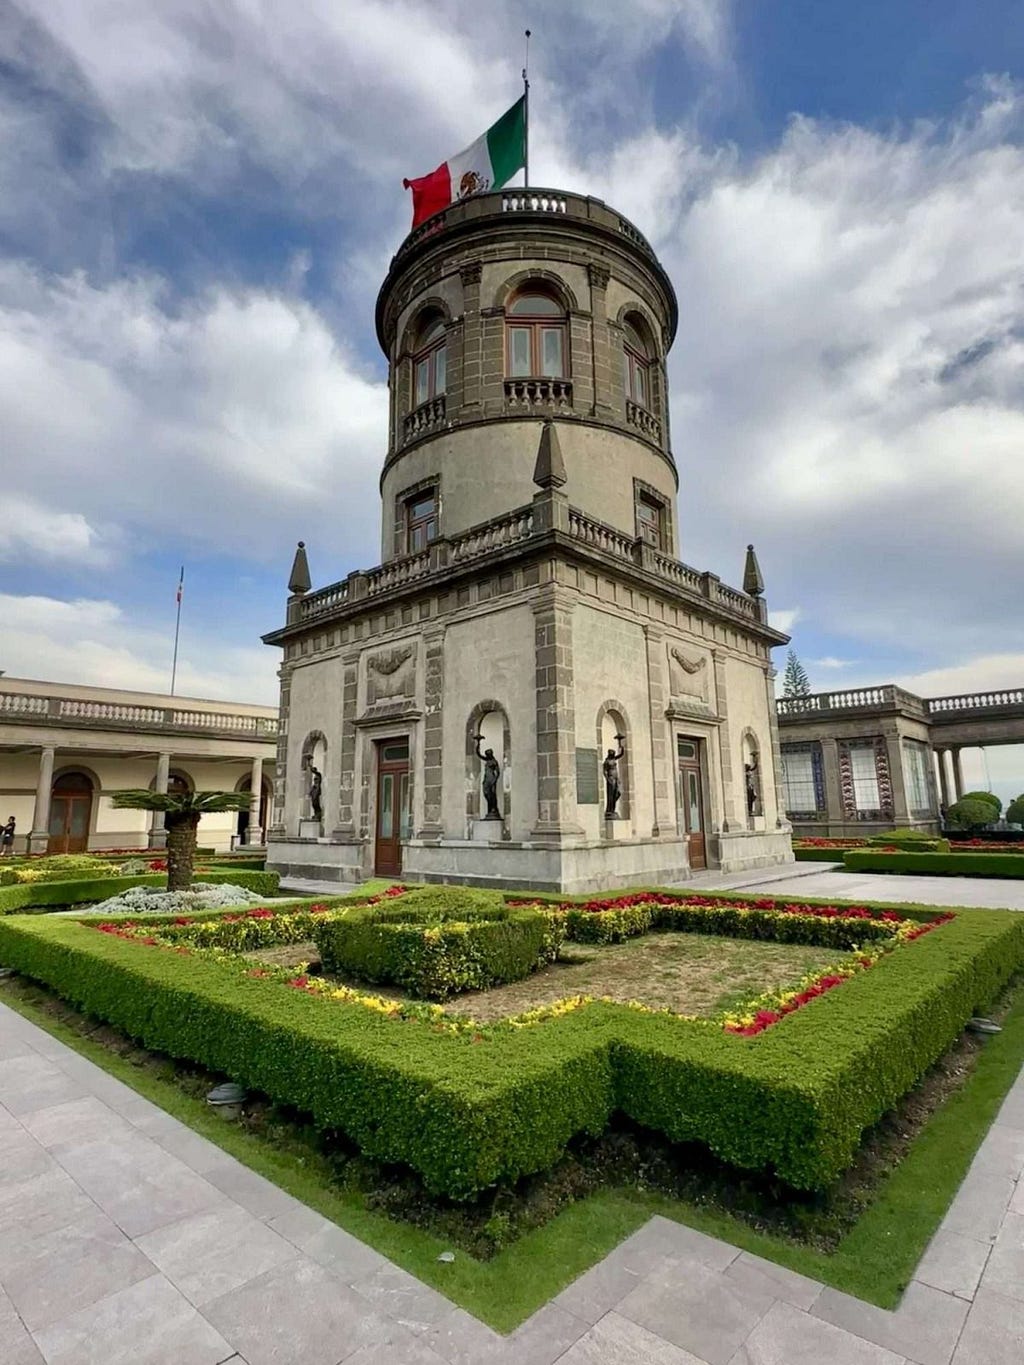 The Chapultepec Castle in Mexico City